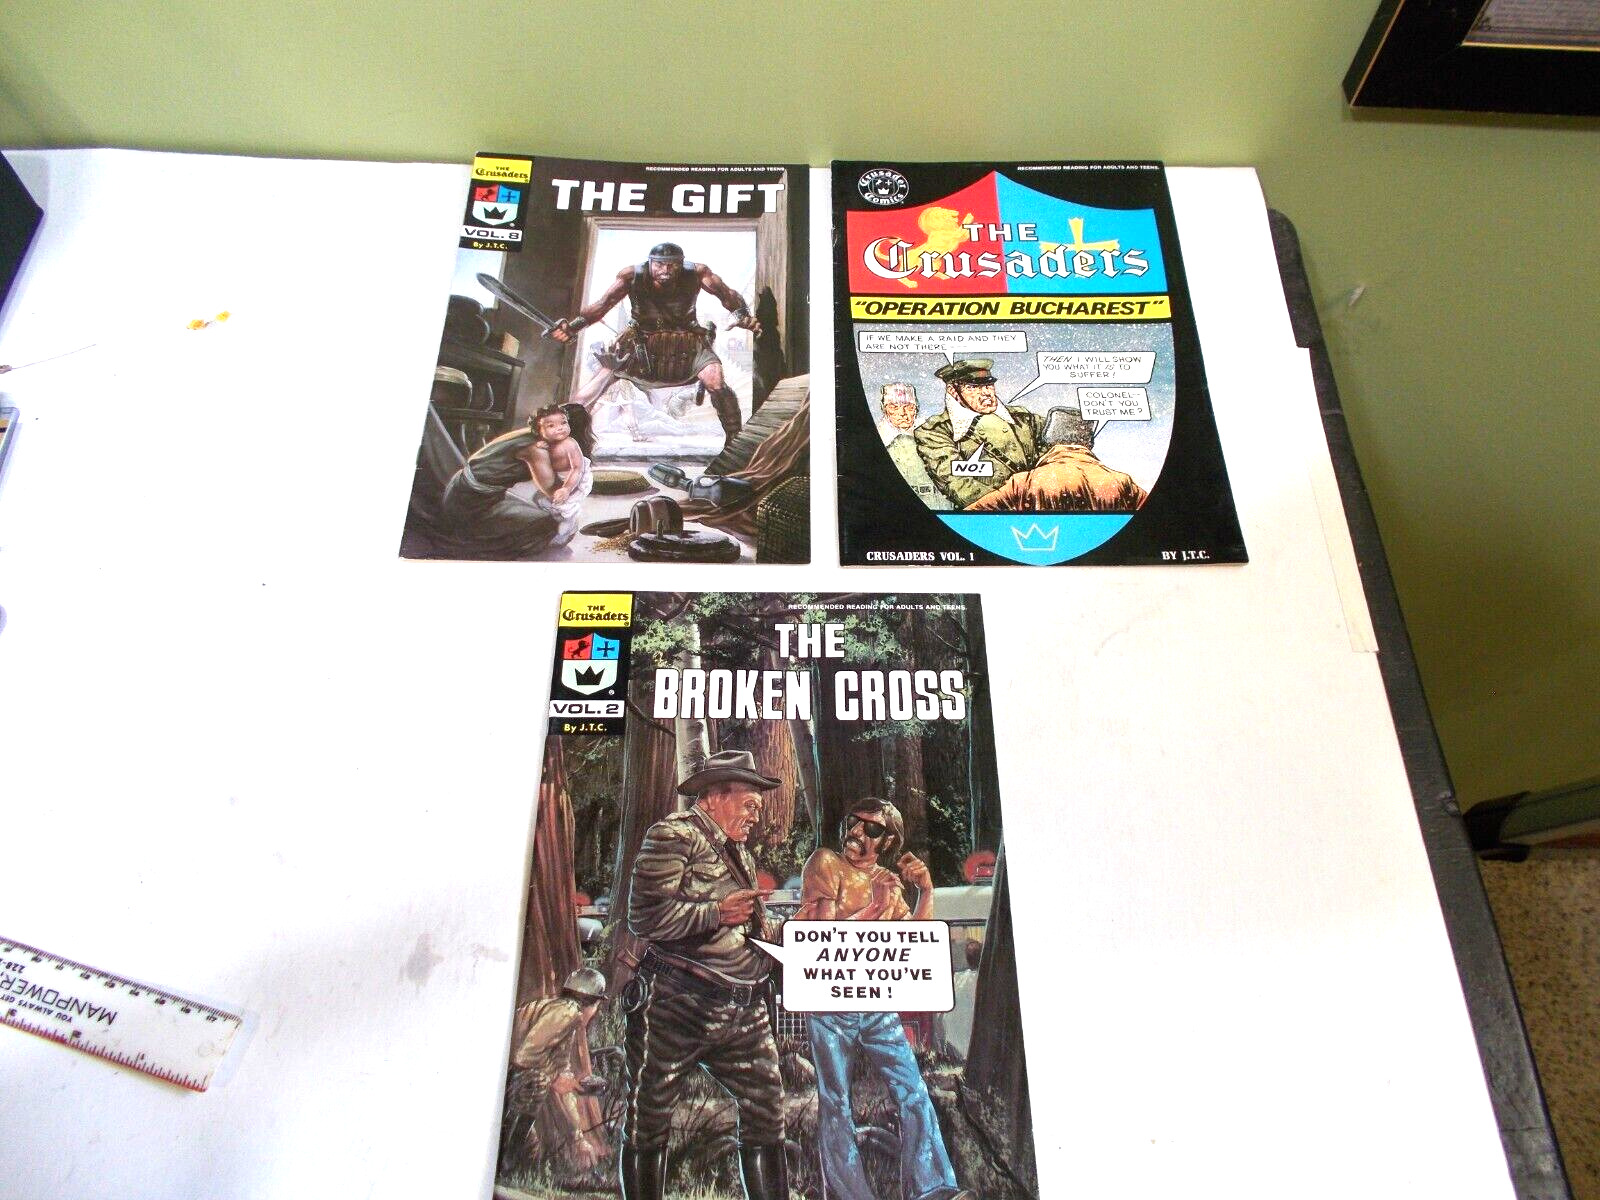 VINTAGE CRUSADERS LOT 3 issues including #1 Operation Bucharest